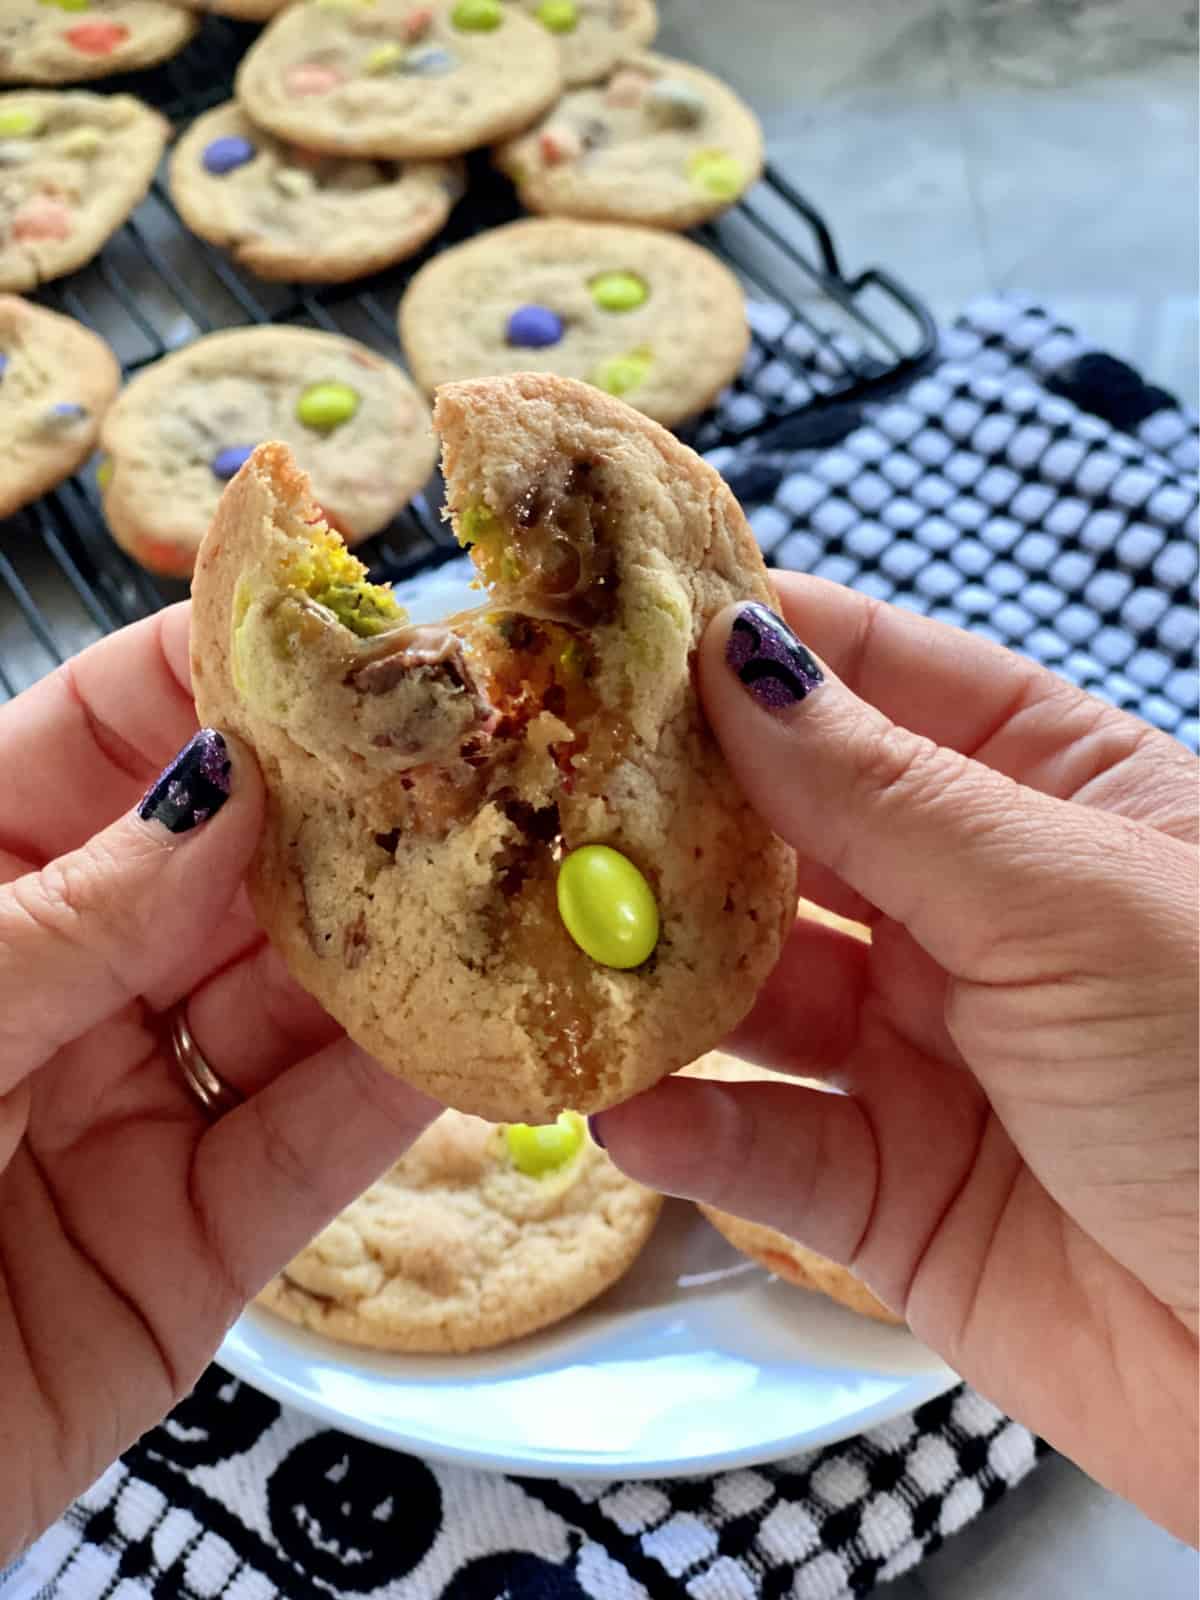 Female hand with purple nails pulling apart a candy cookie.